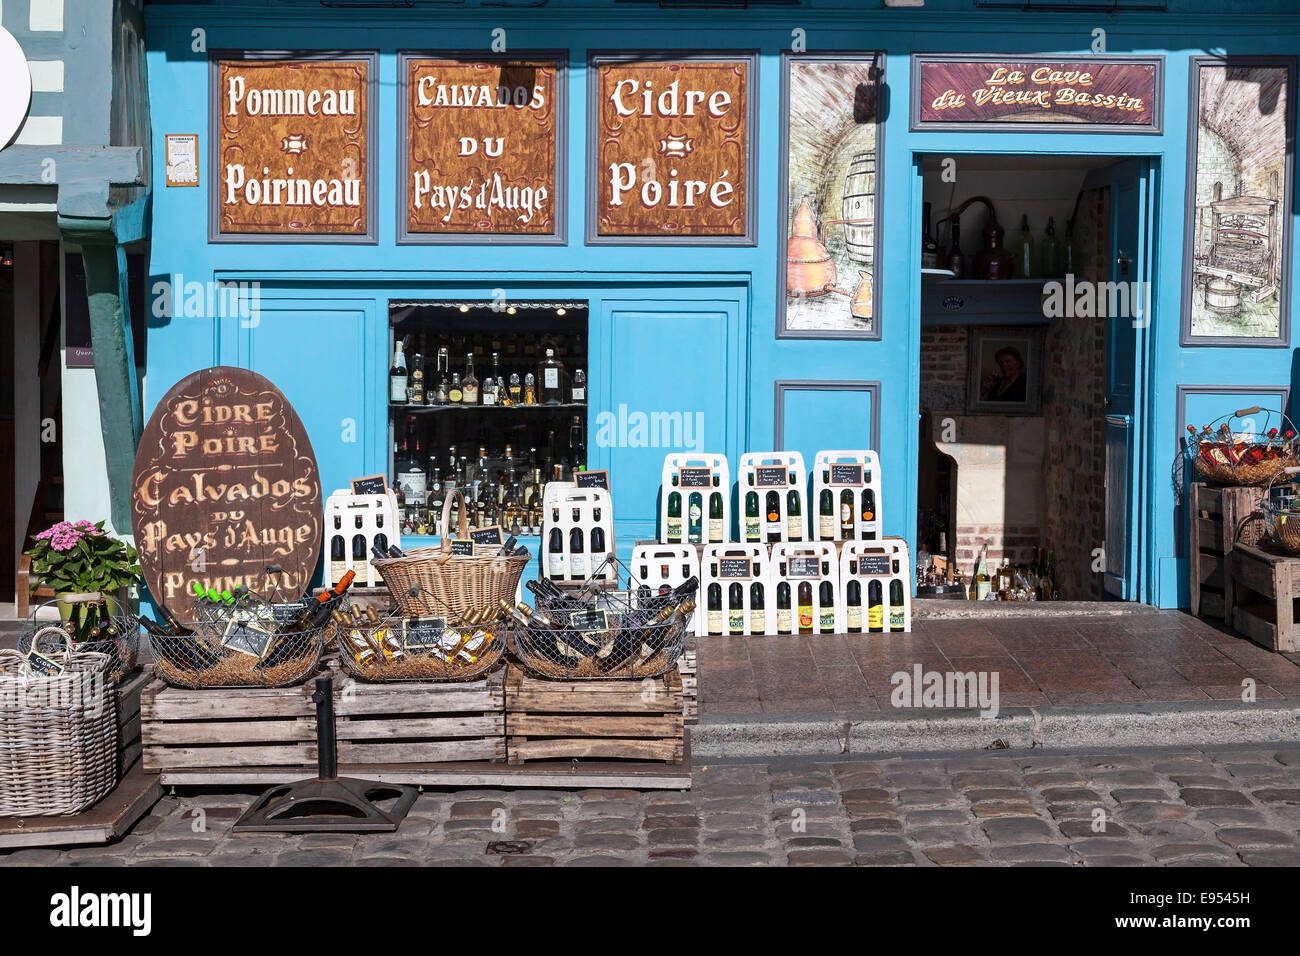 A small store selling calvados and cider, Vieux Bassin, Honfleur, Département Calvados, Basse-Normandie, France Stock Photo